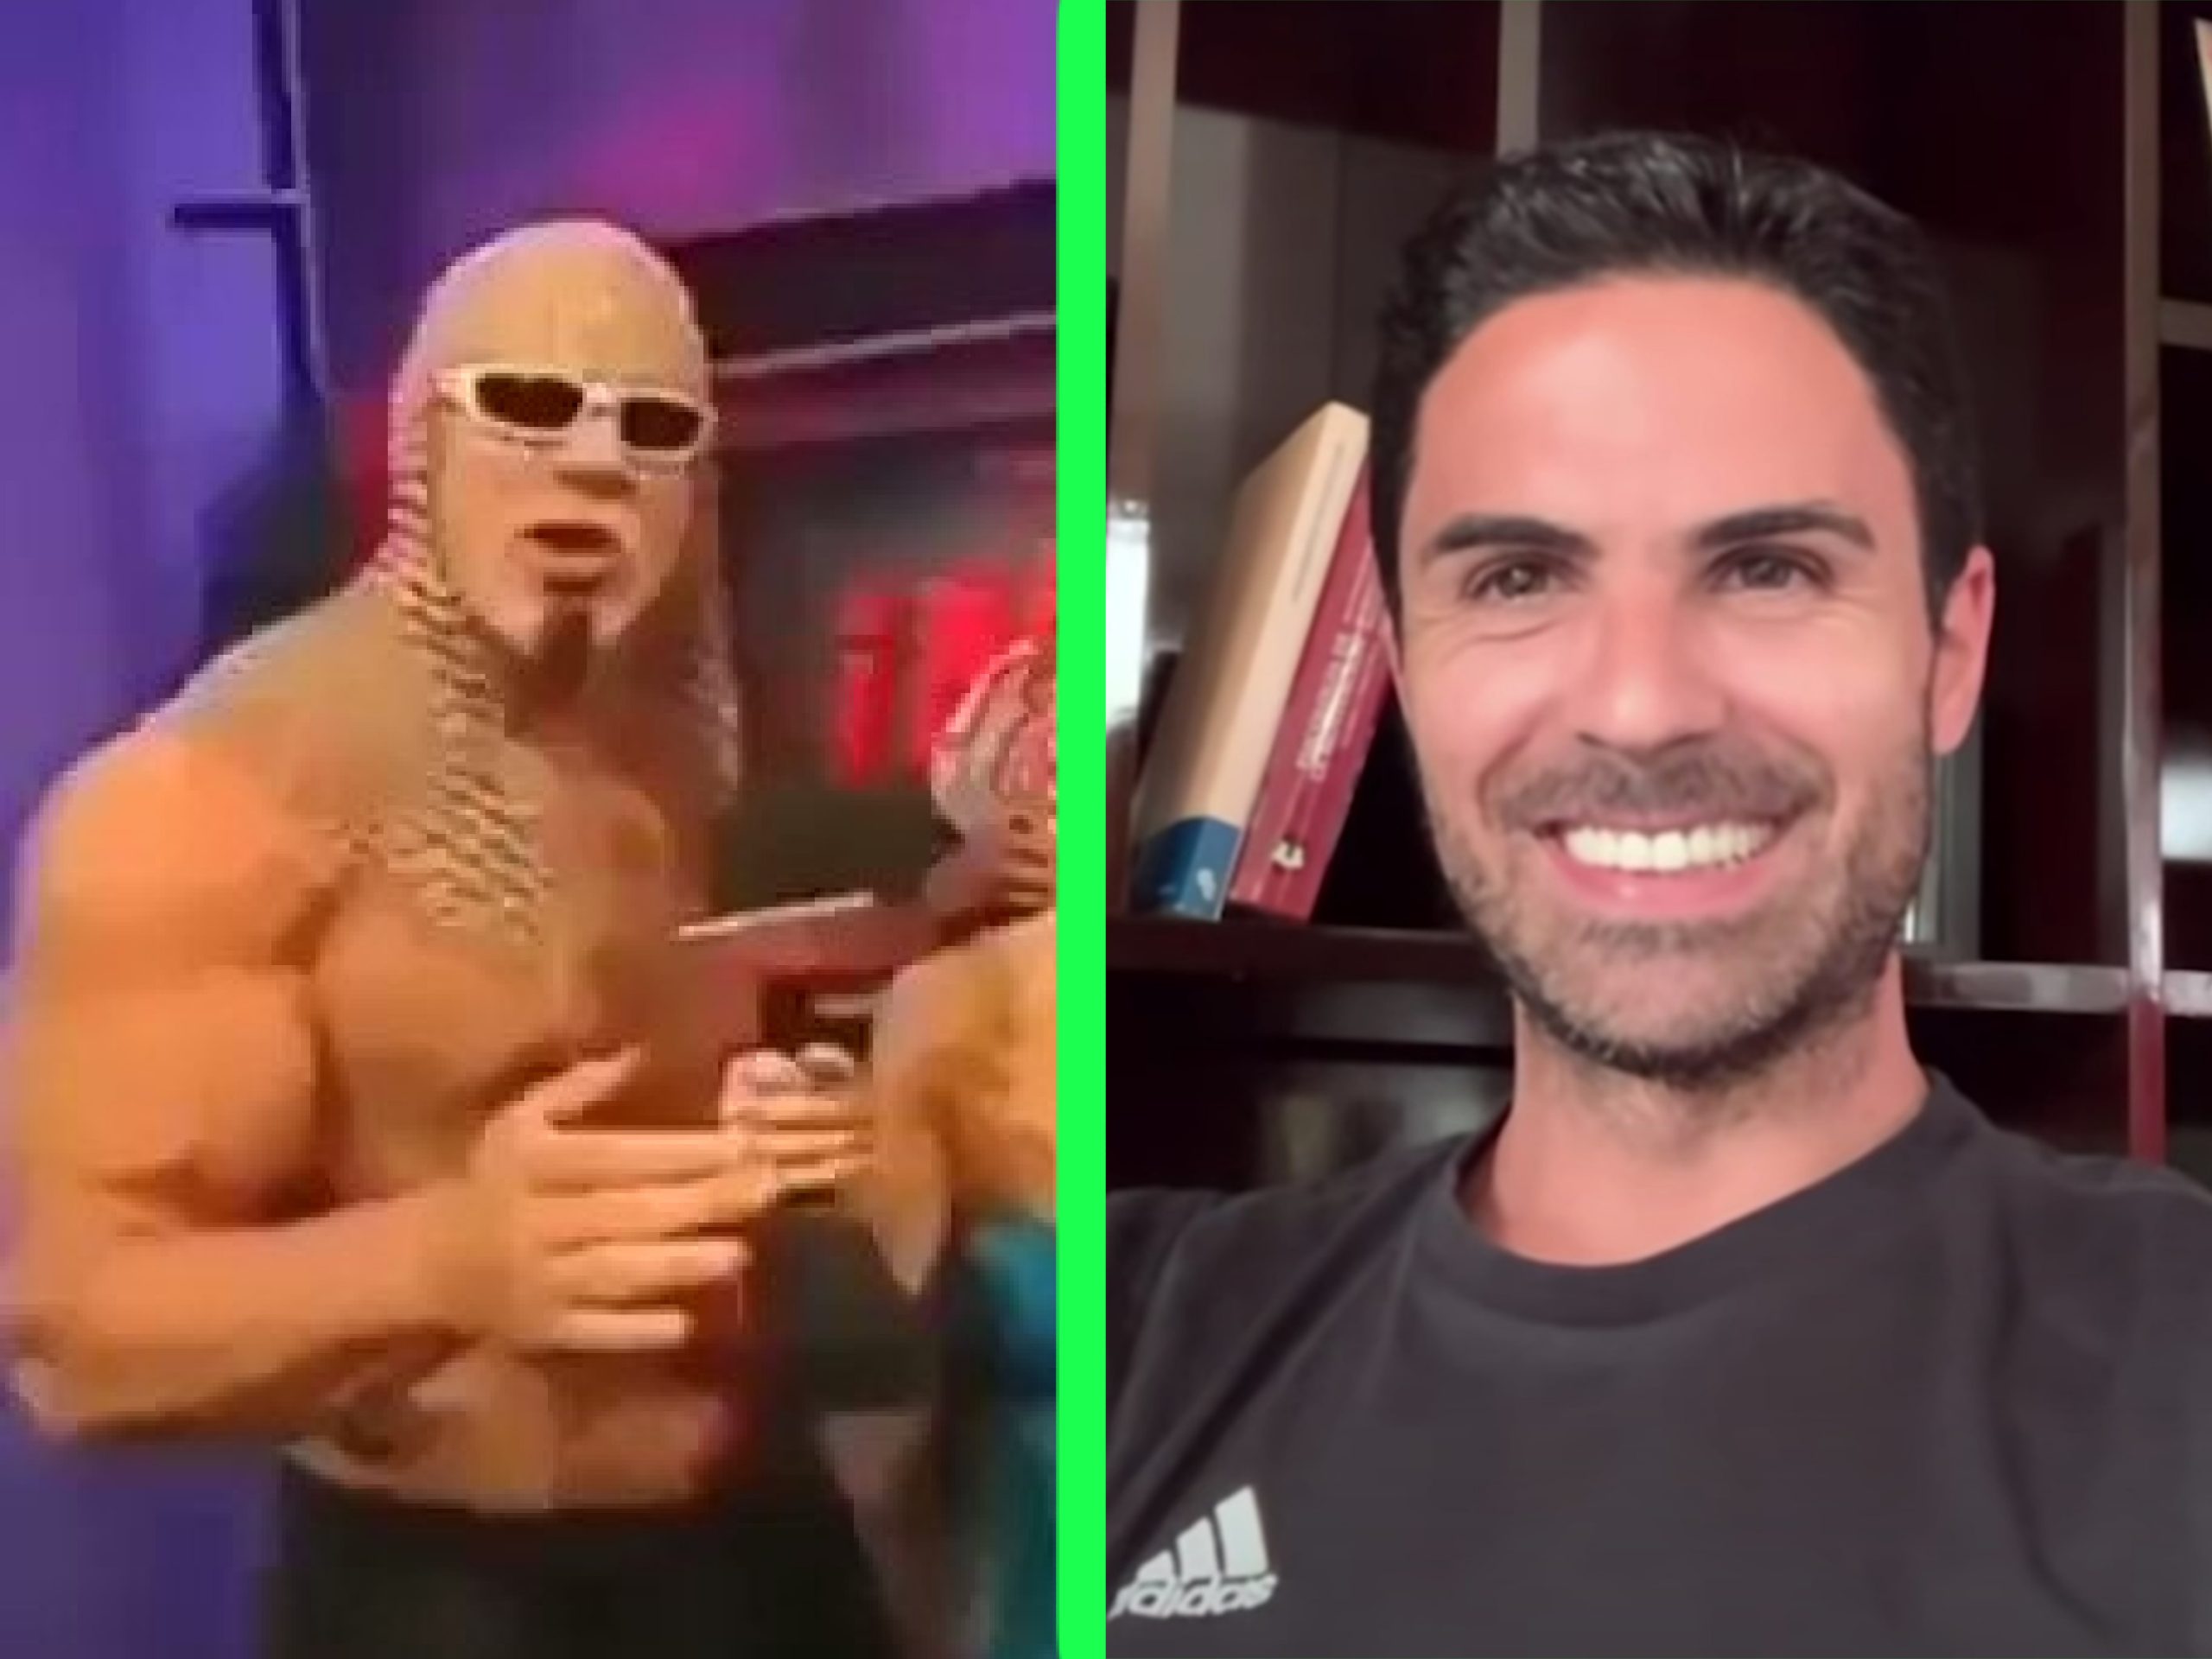 Not sure if Mikel Arteta or Scott Steiner as Arsenal boss turns to bizarre stats to defend poor form